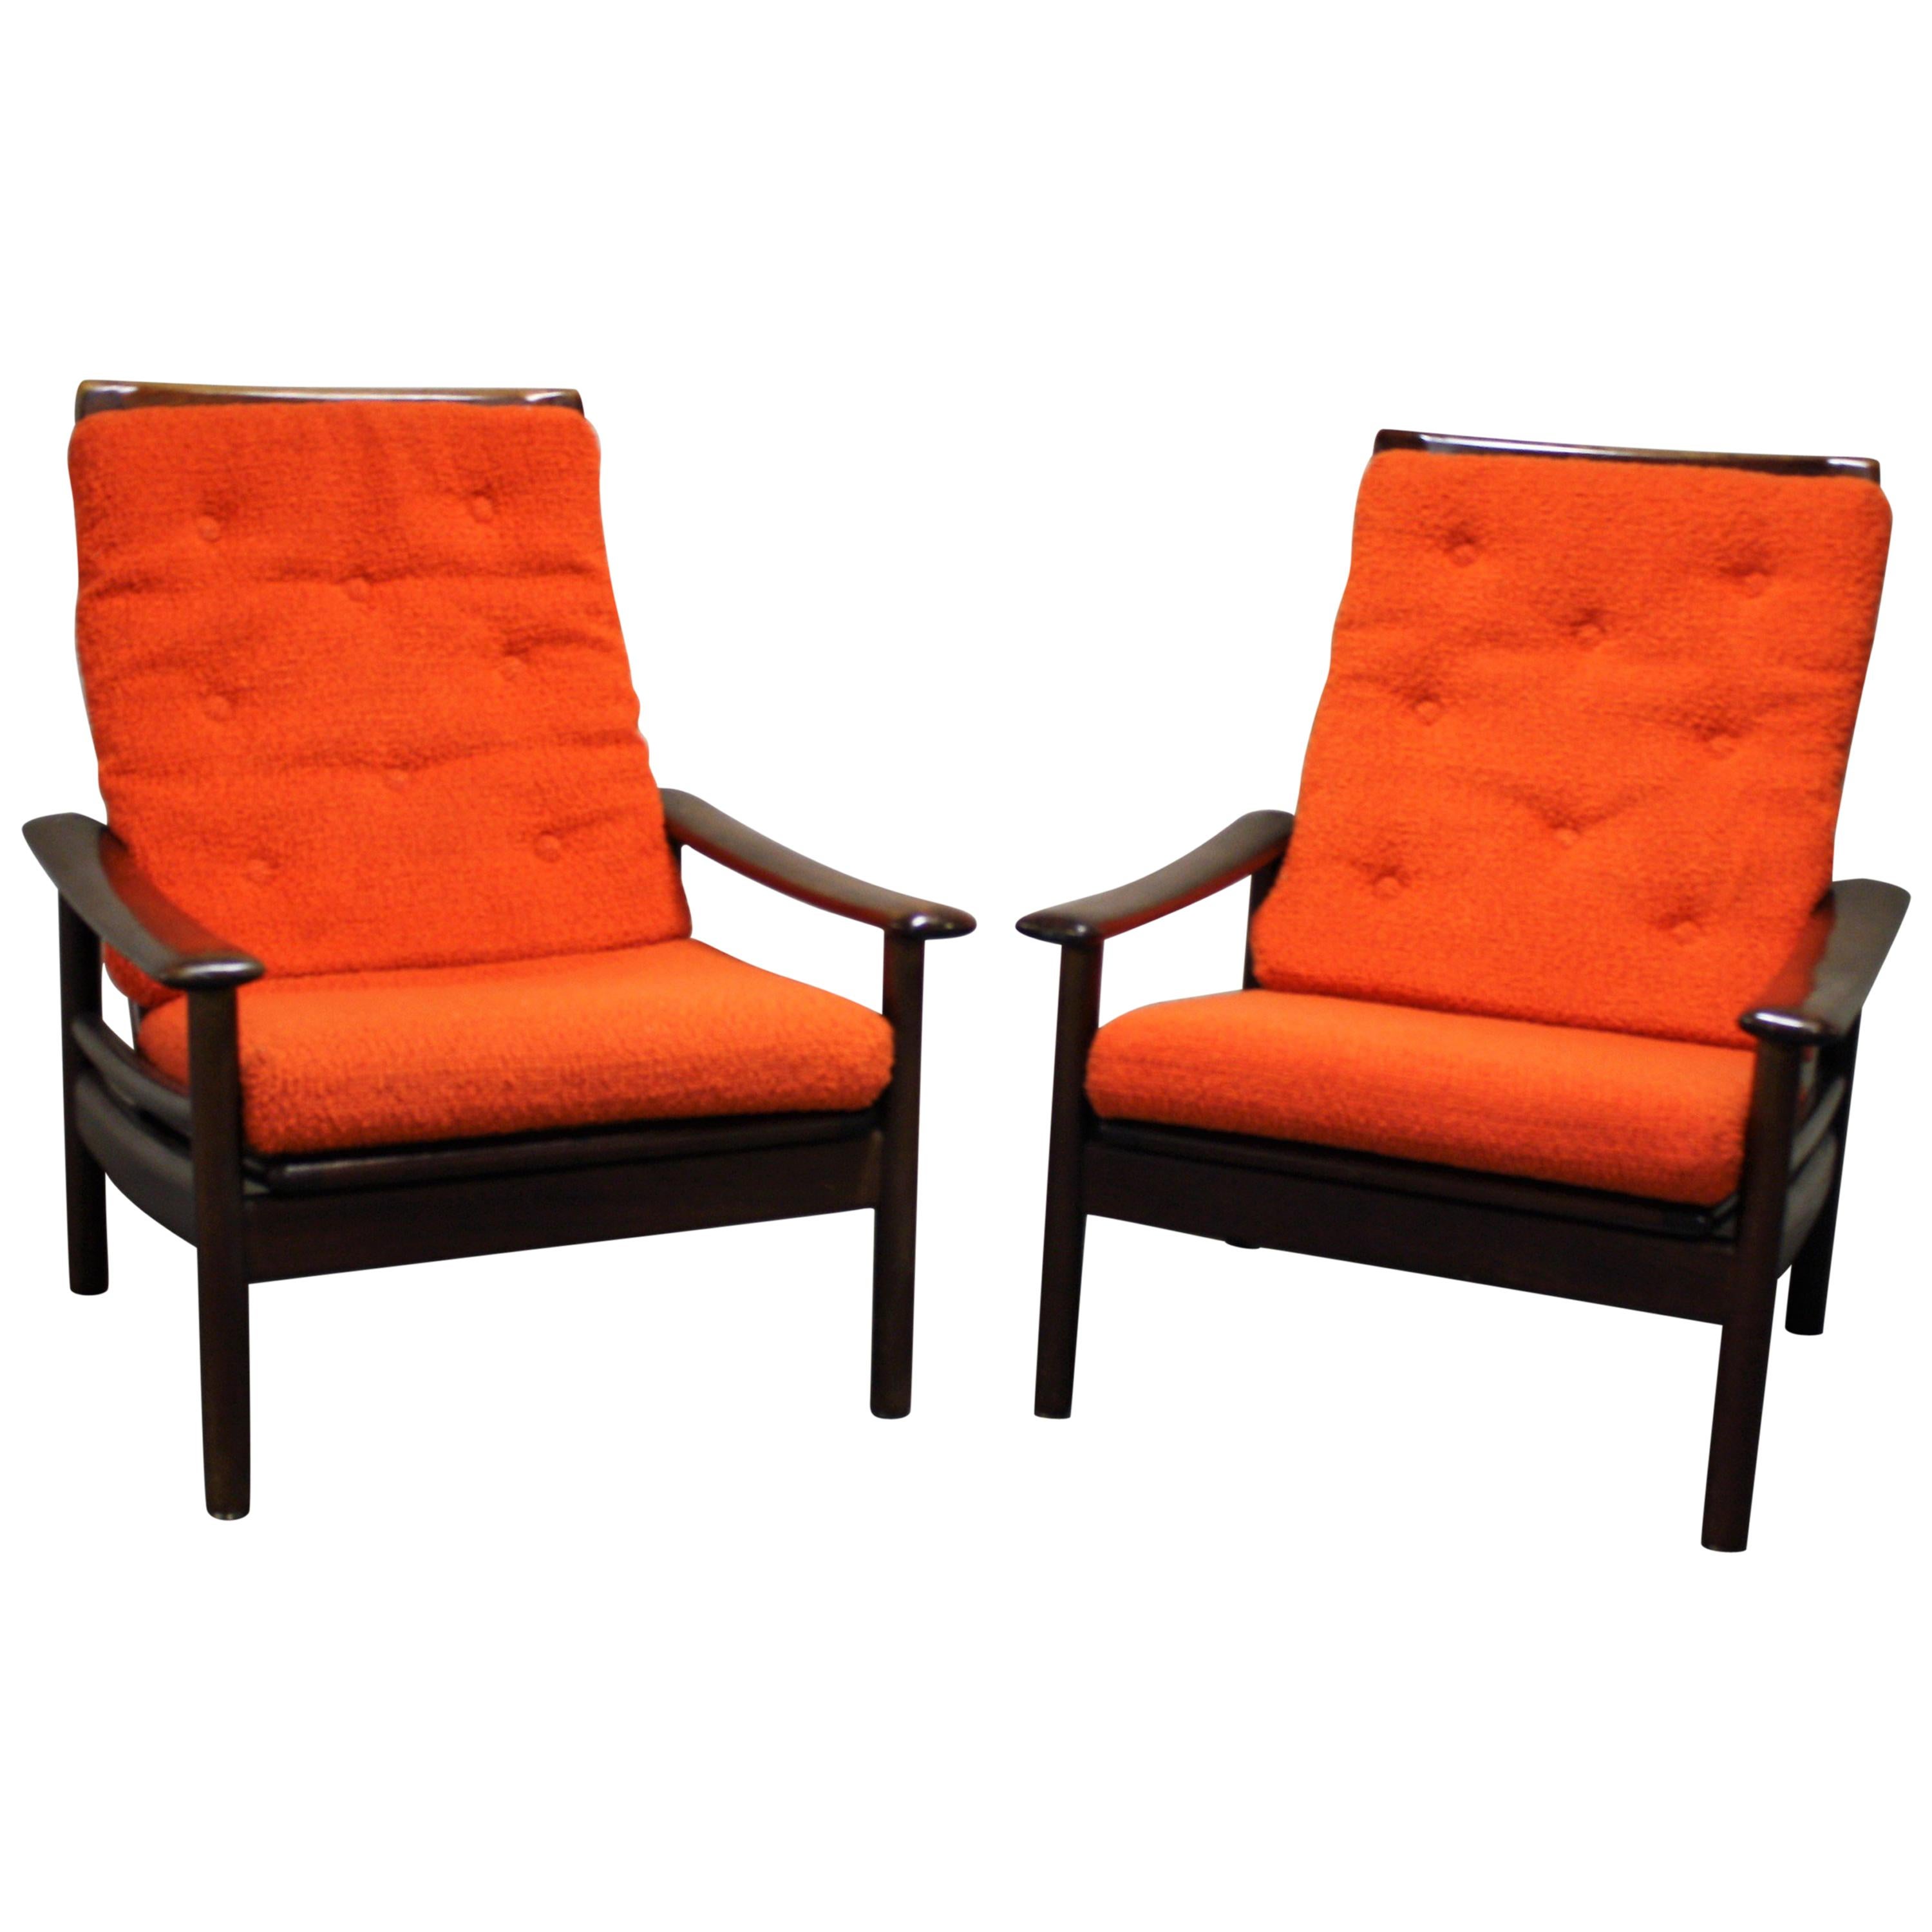 Vintage Scandinavian Lounge Chairs, Set of Two, 1960s